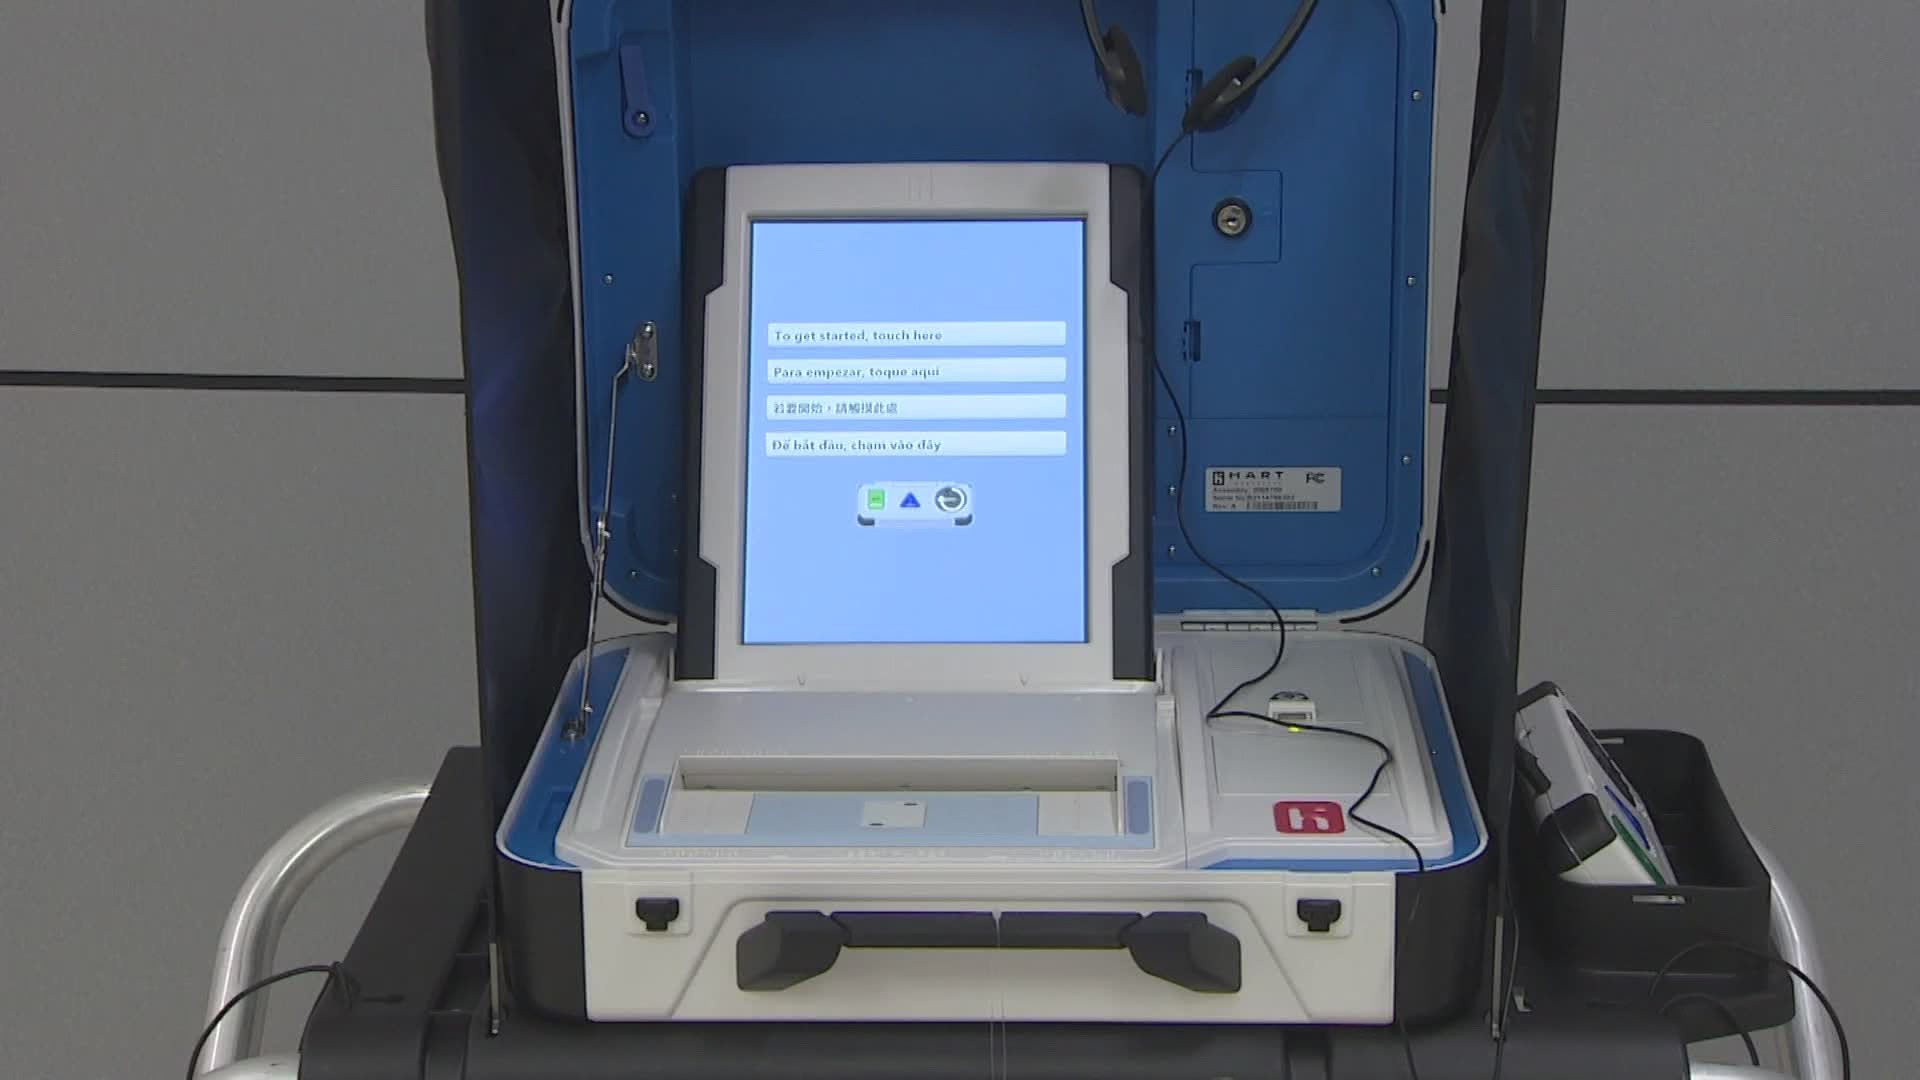 Elections officials say the touchscreen voting system will make voting easier and adds another layer of security.